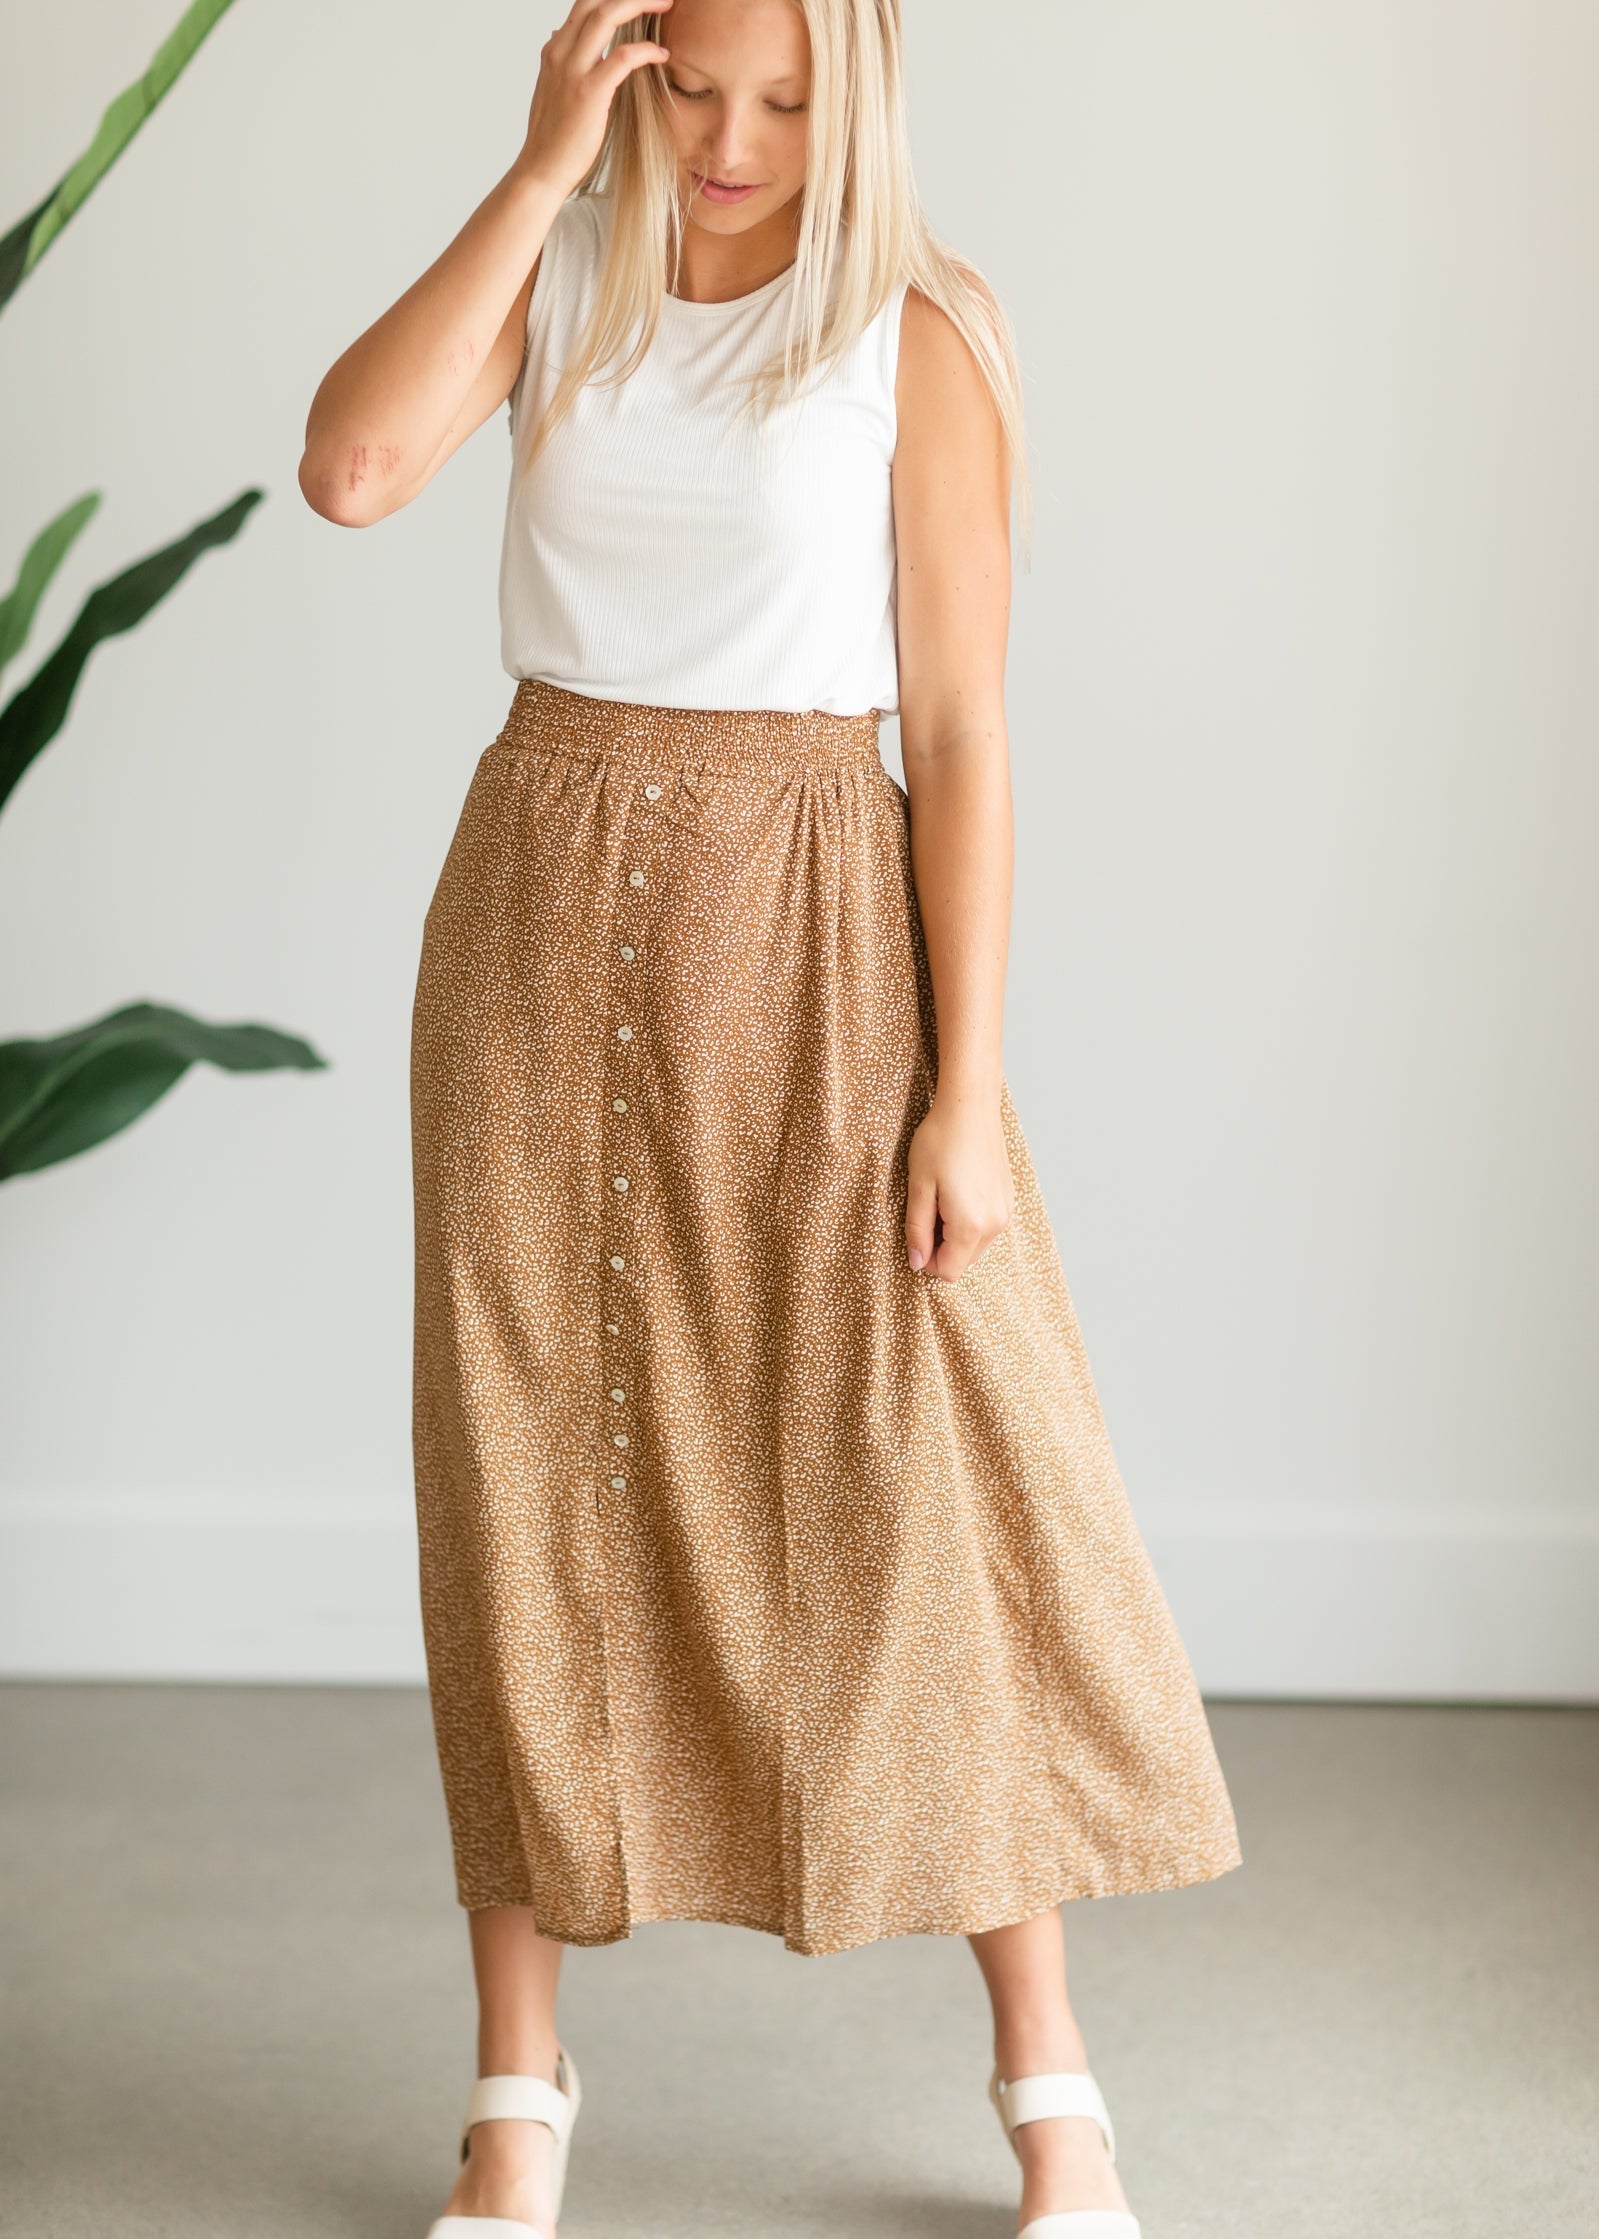 Camel Button Front Patterned Maxi Skirt Skirts